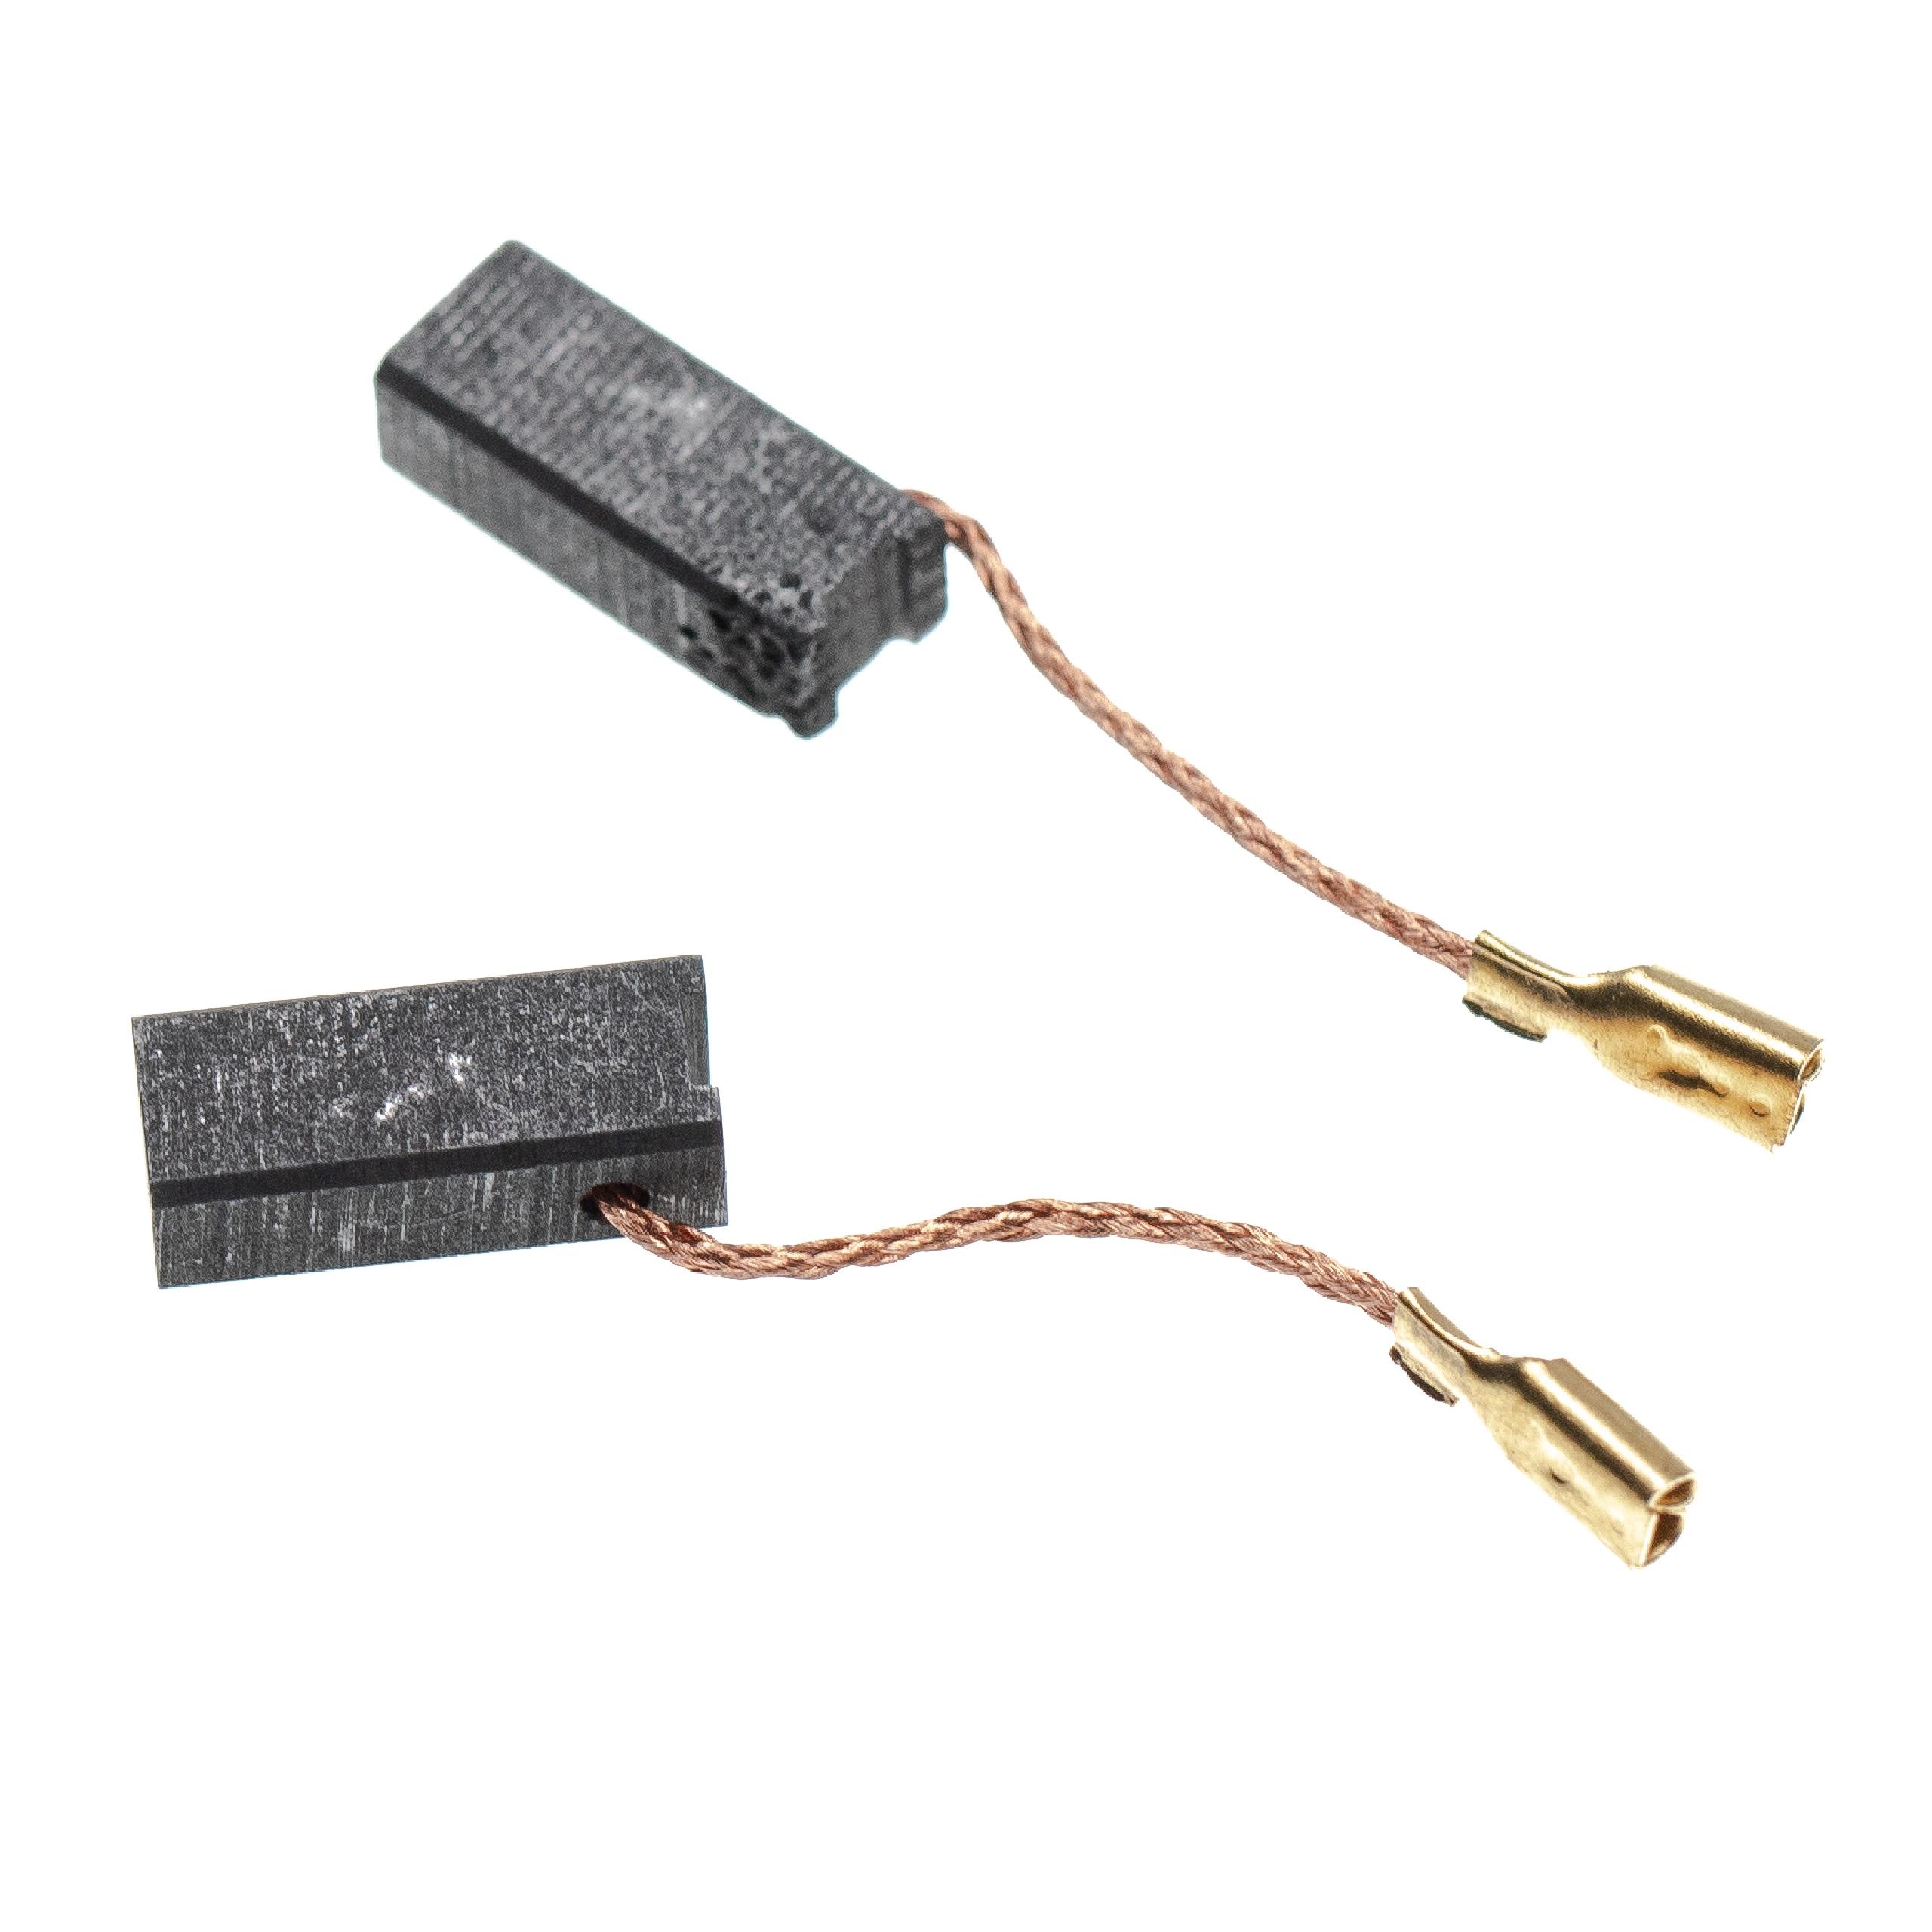 2x Carbon Brush as Replacement for Metabo 20-008 Electric Power Tools + Angled Connector, 15.3 x 5 x 6.3mm